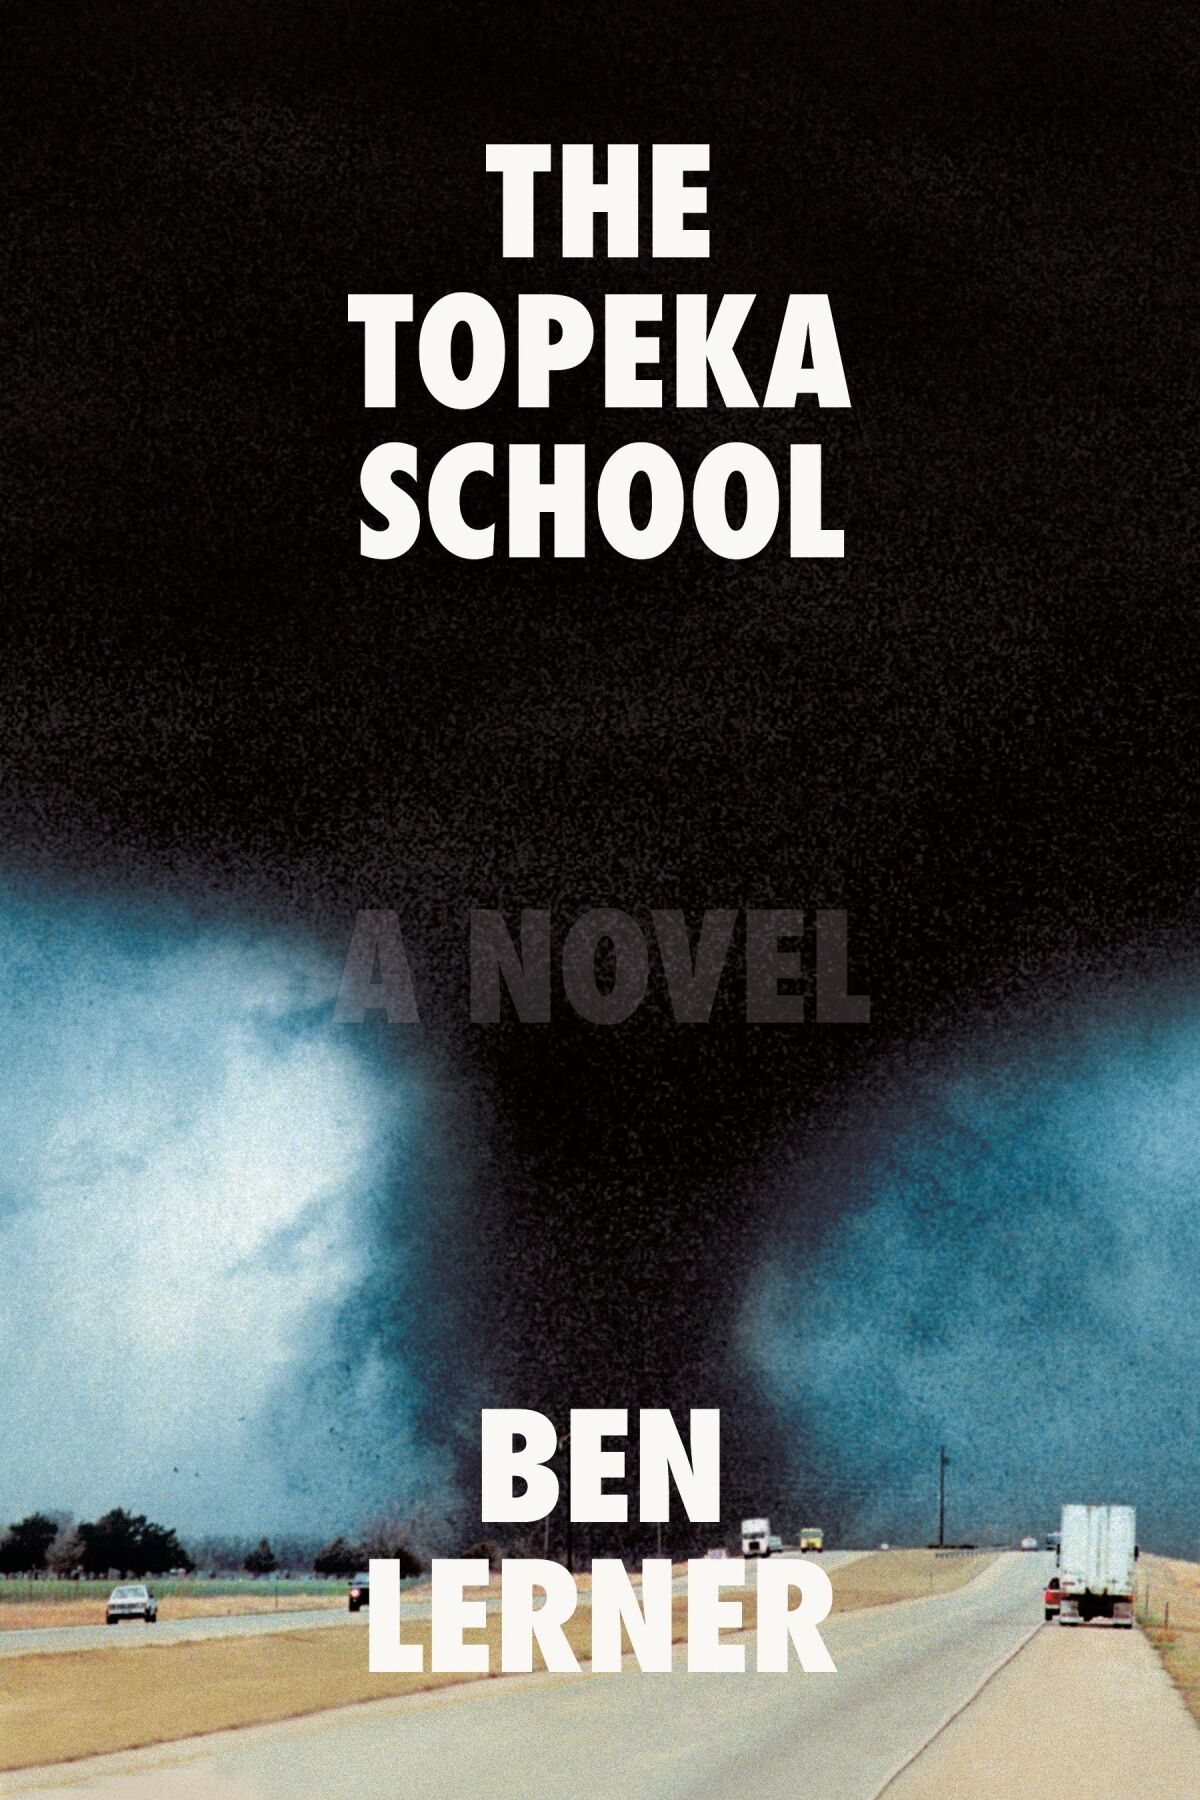 Book jacket for "The Topeka School" by Ben Lerner